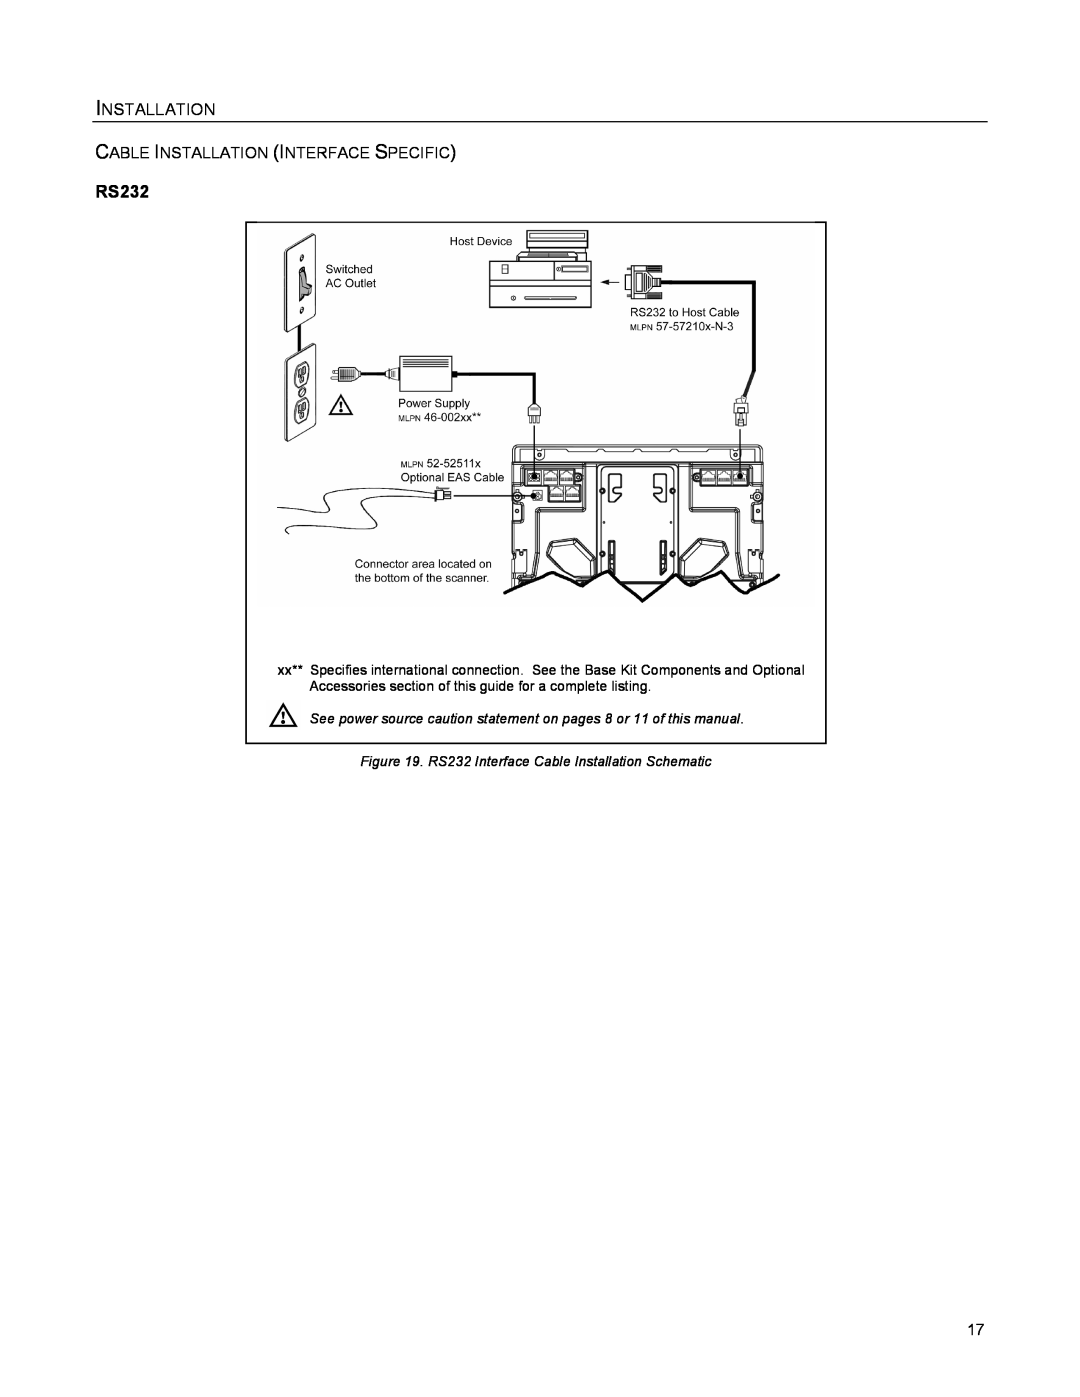 Metrologic Instruments MS2421 Installation, RS232, See power source caution statement on pages 8 or 11 of this manual 